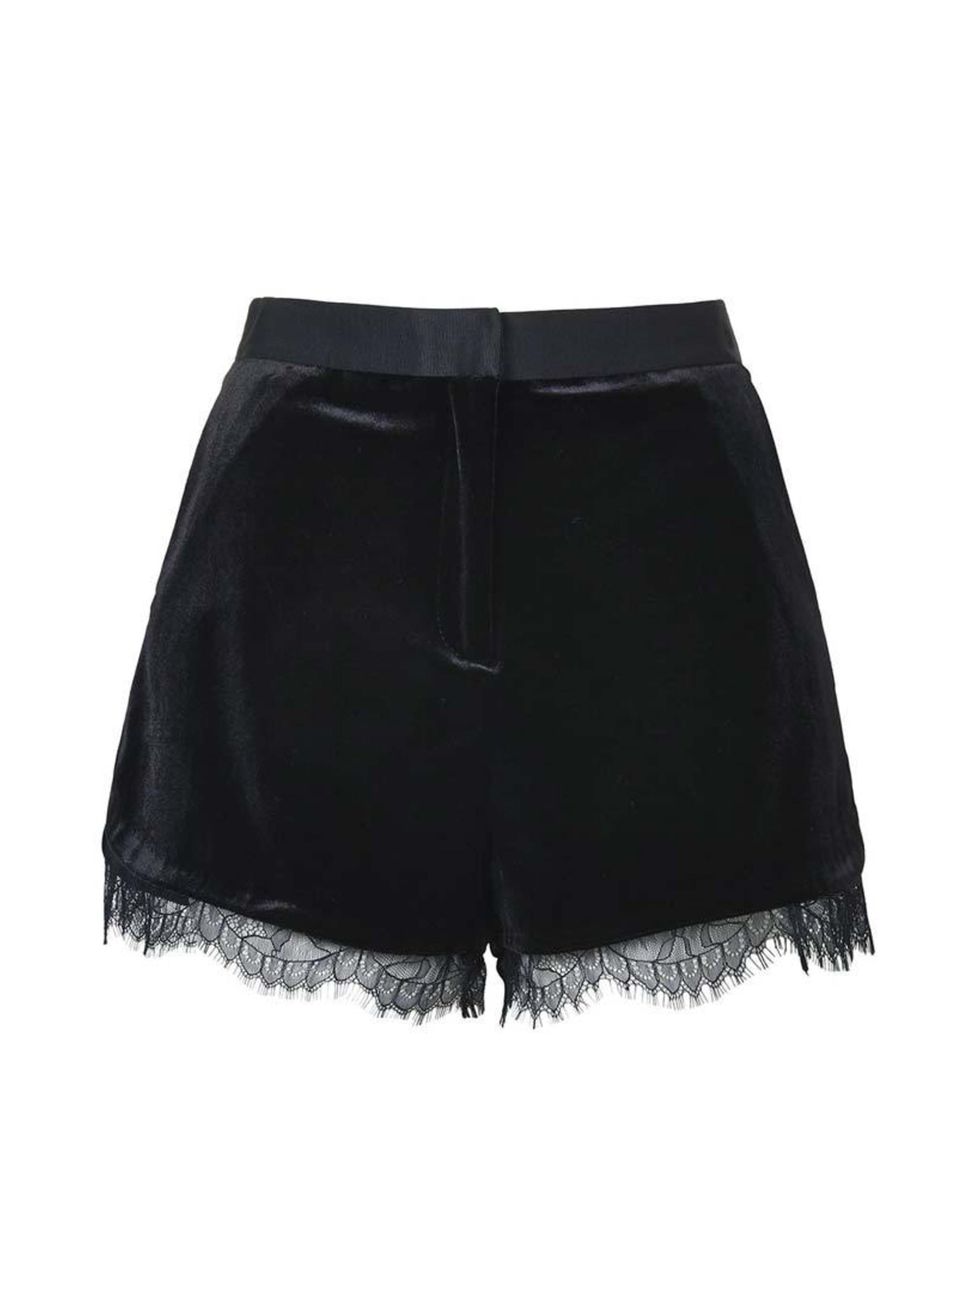 <p>Not dissimilar to a pair that Art Director Miette L. Johnson has been spotted wearing for everyday.</p>

<p><a href="http://www.topshop.com/en/tsuk/product/clothing-427/halloween-3473593/going-out-3489214/velvet-lace-shorts-3503209?refinements=category